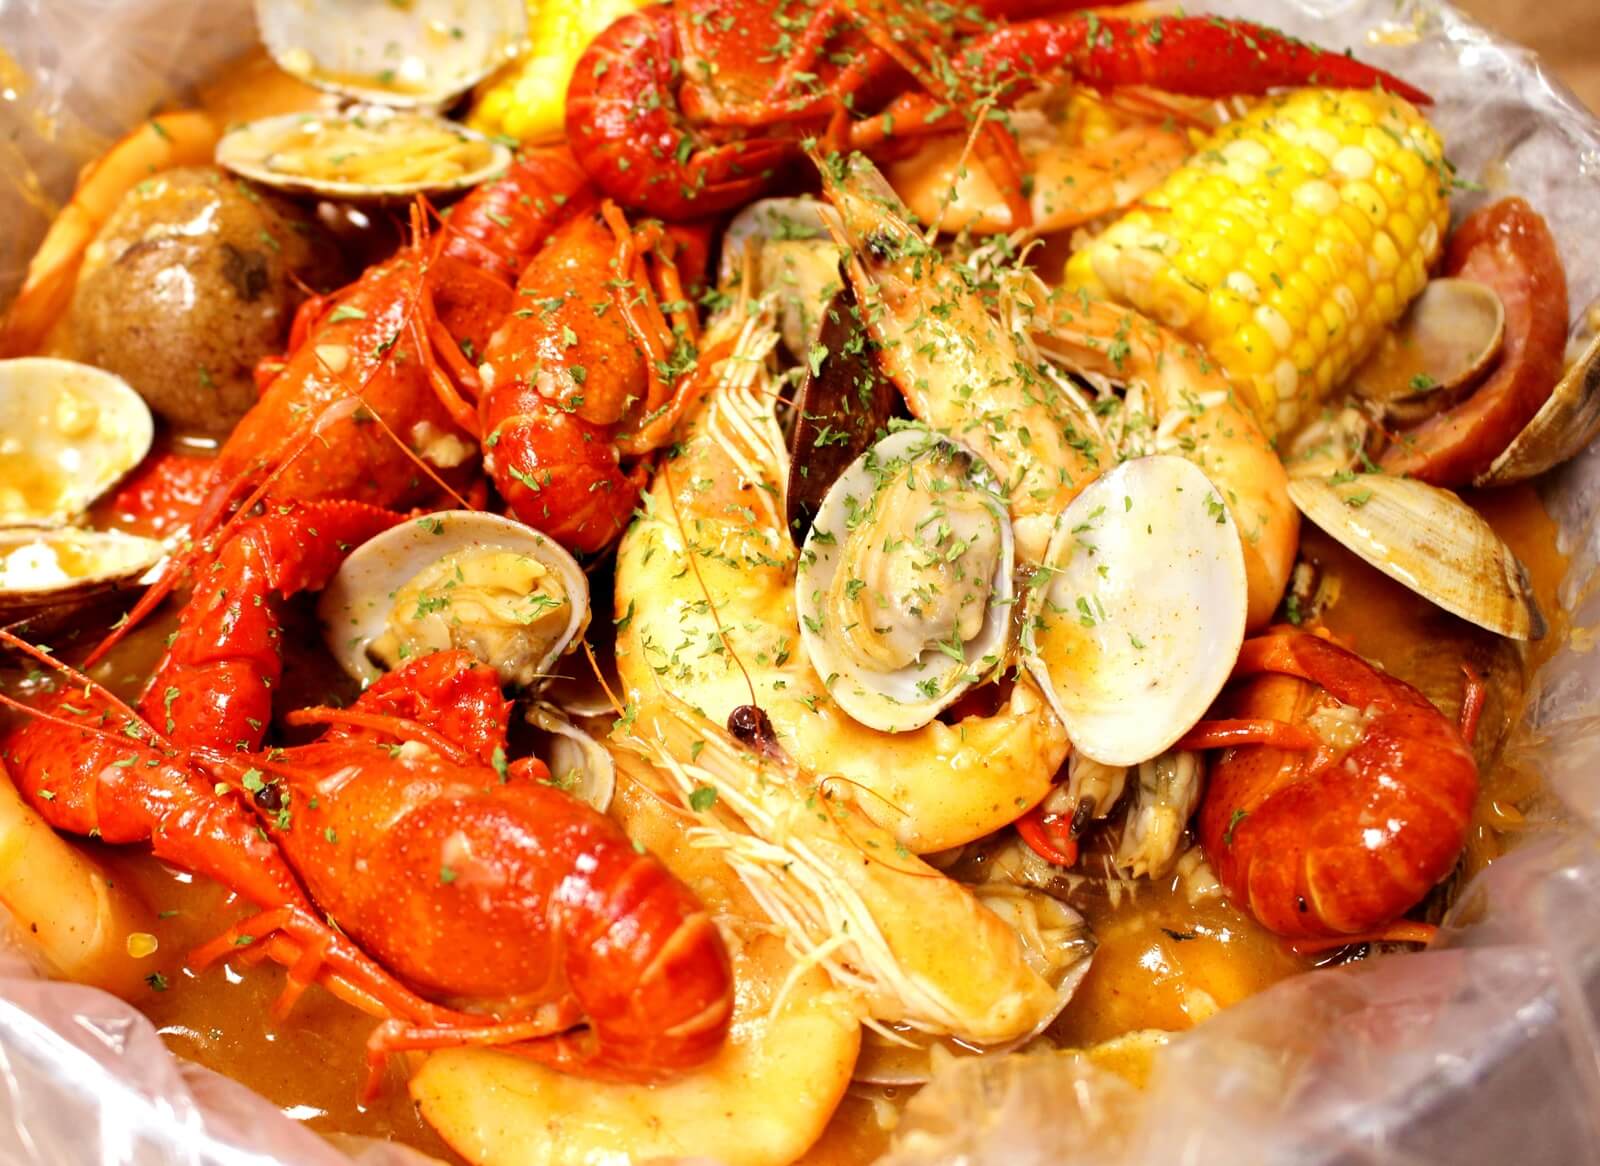 Seafood Combo 1 - Crawfish, Shrimp And Clam